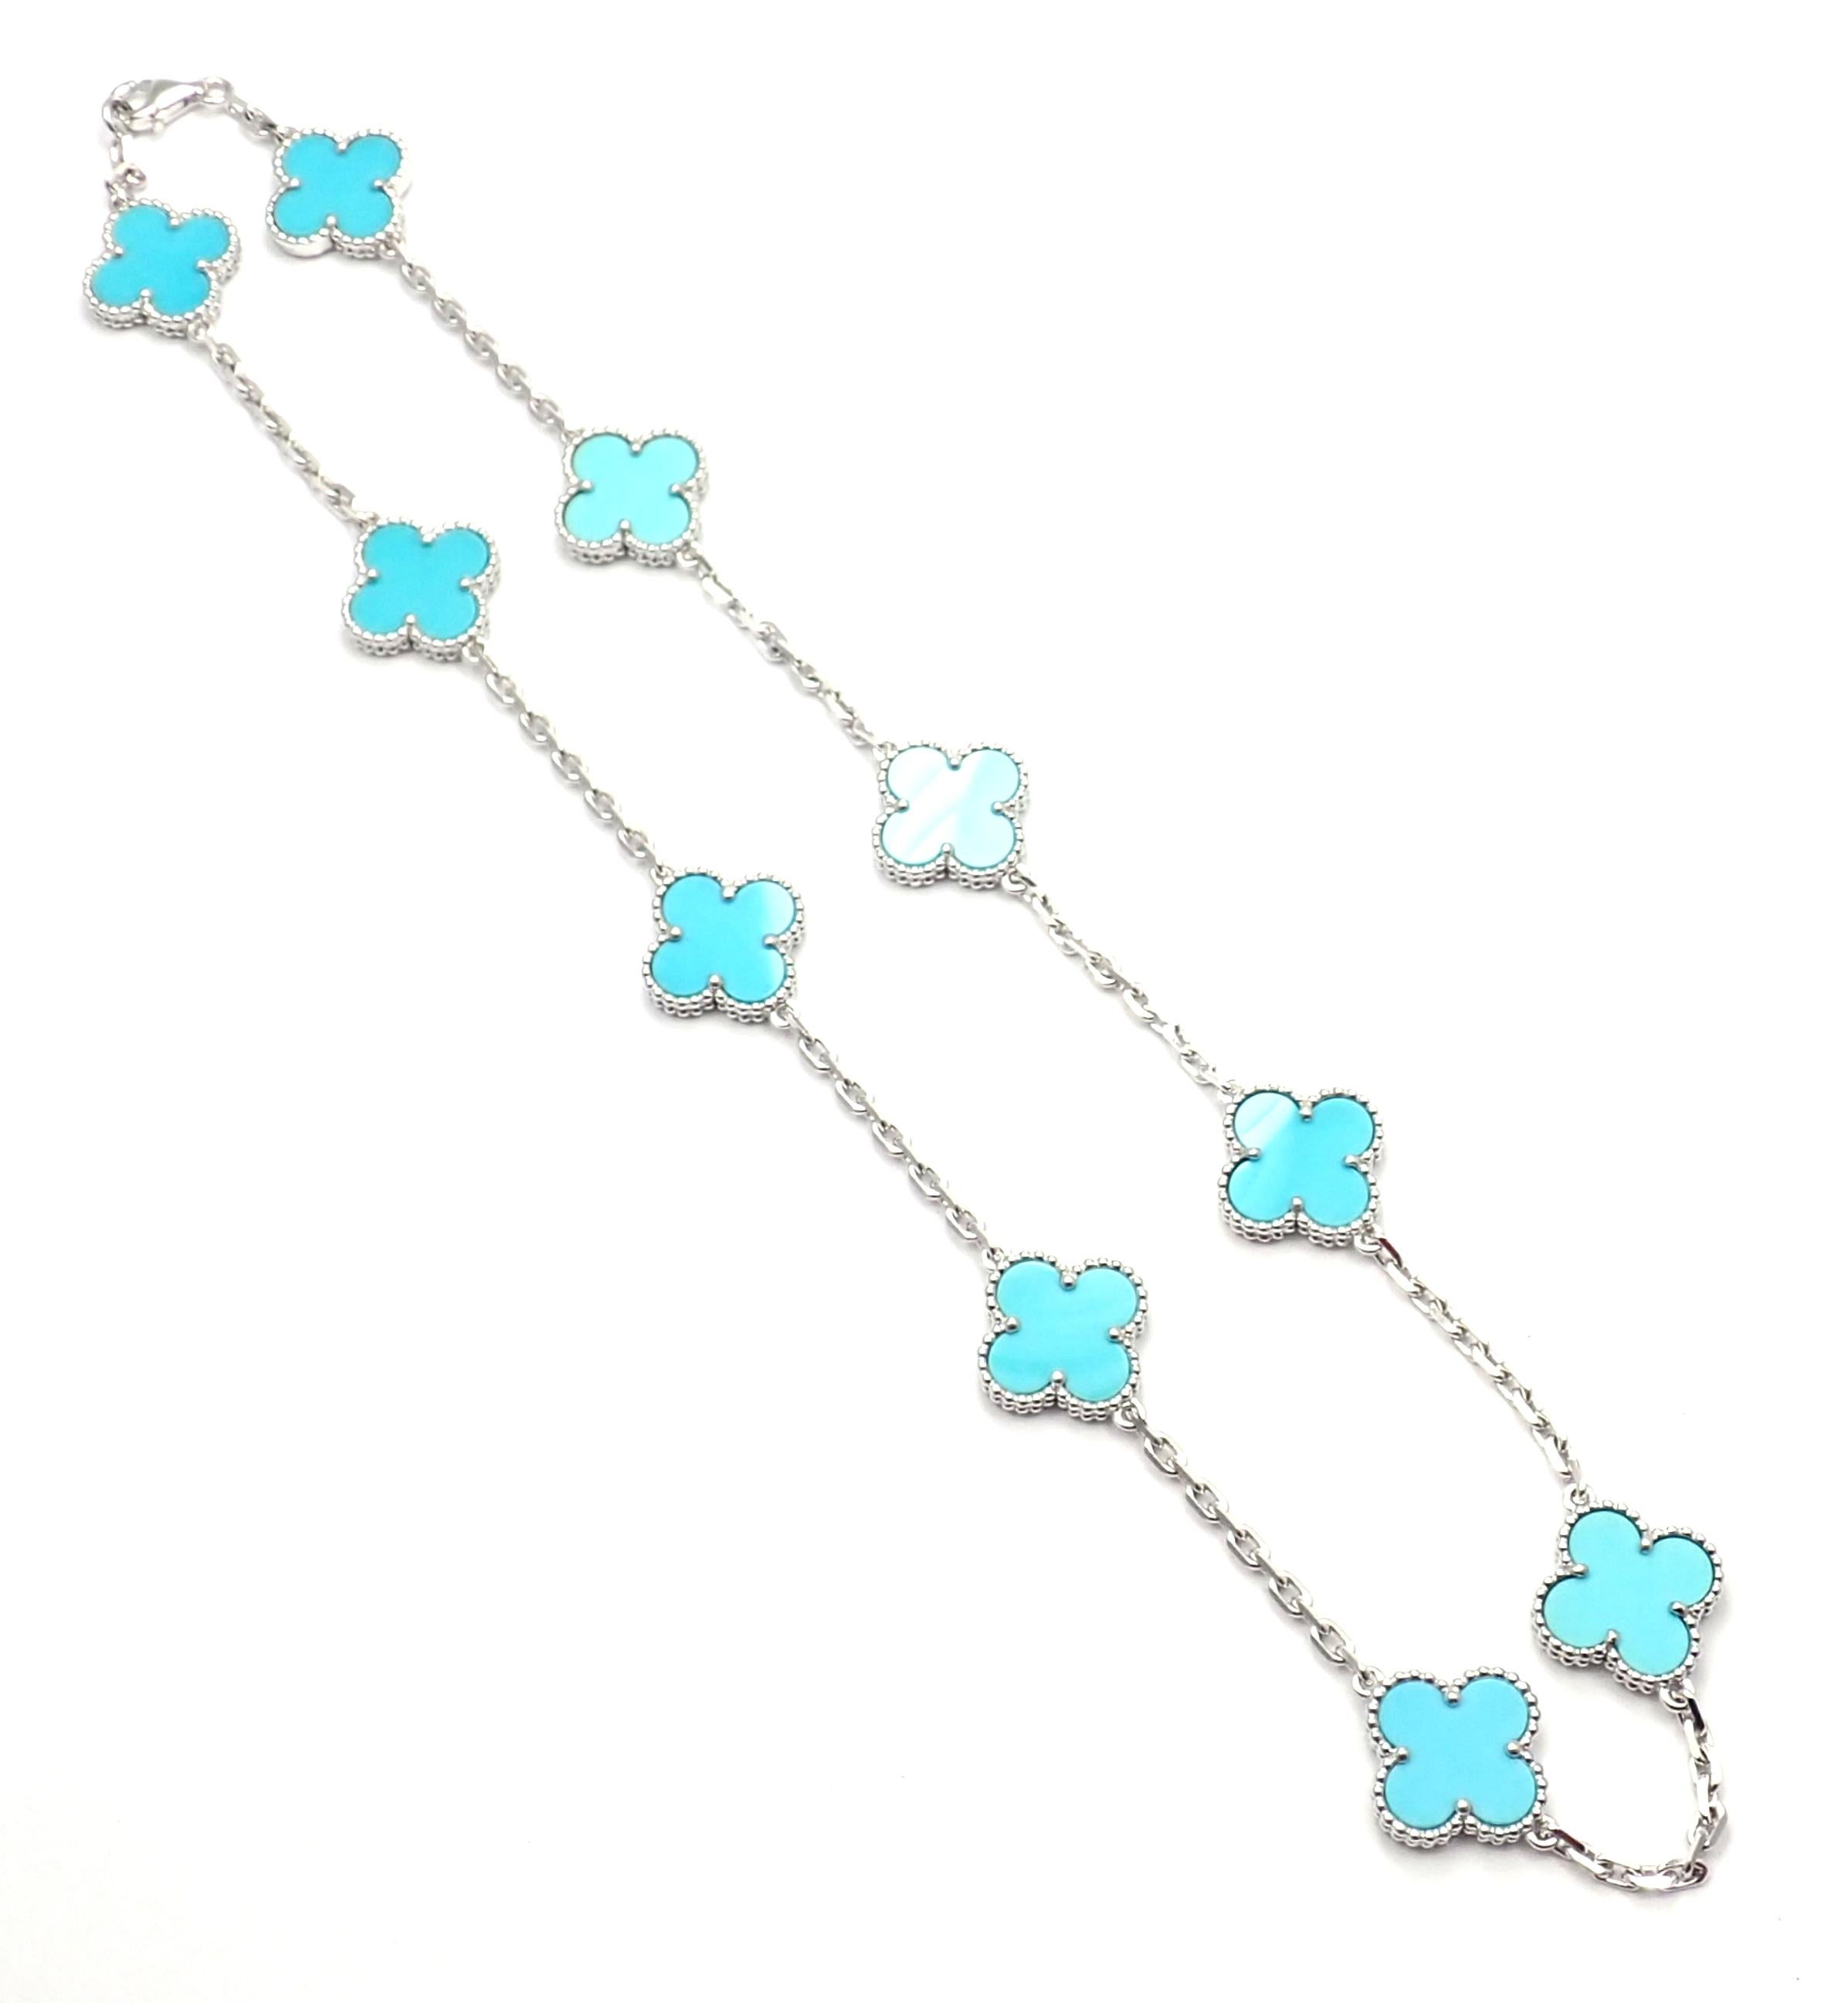 18k White Gold Alhambra 10 Motifs Turquoise Necklace by Van Cleef & Arpels. 
With 10 motifs of turquoise alhambra stones 15mm each.
This necklace comes with VCA certificate of authenticity.
Details: 
Length: 16.75